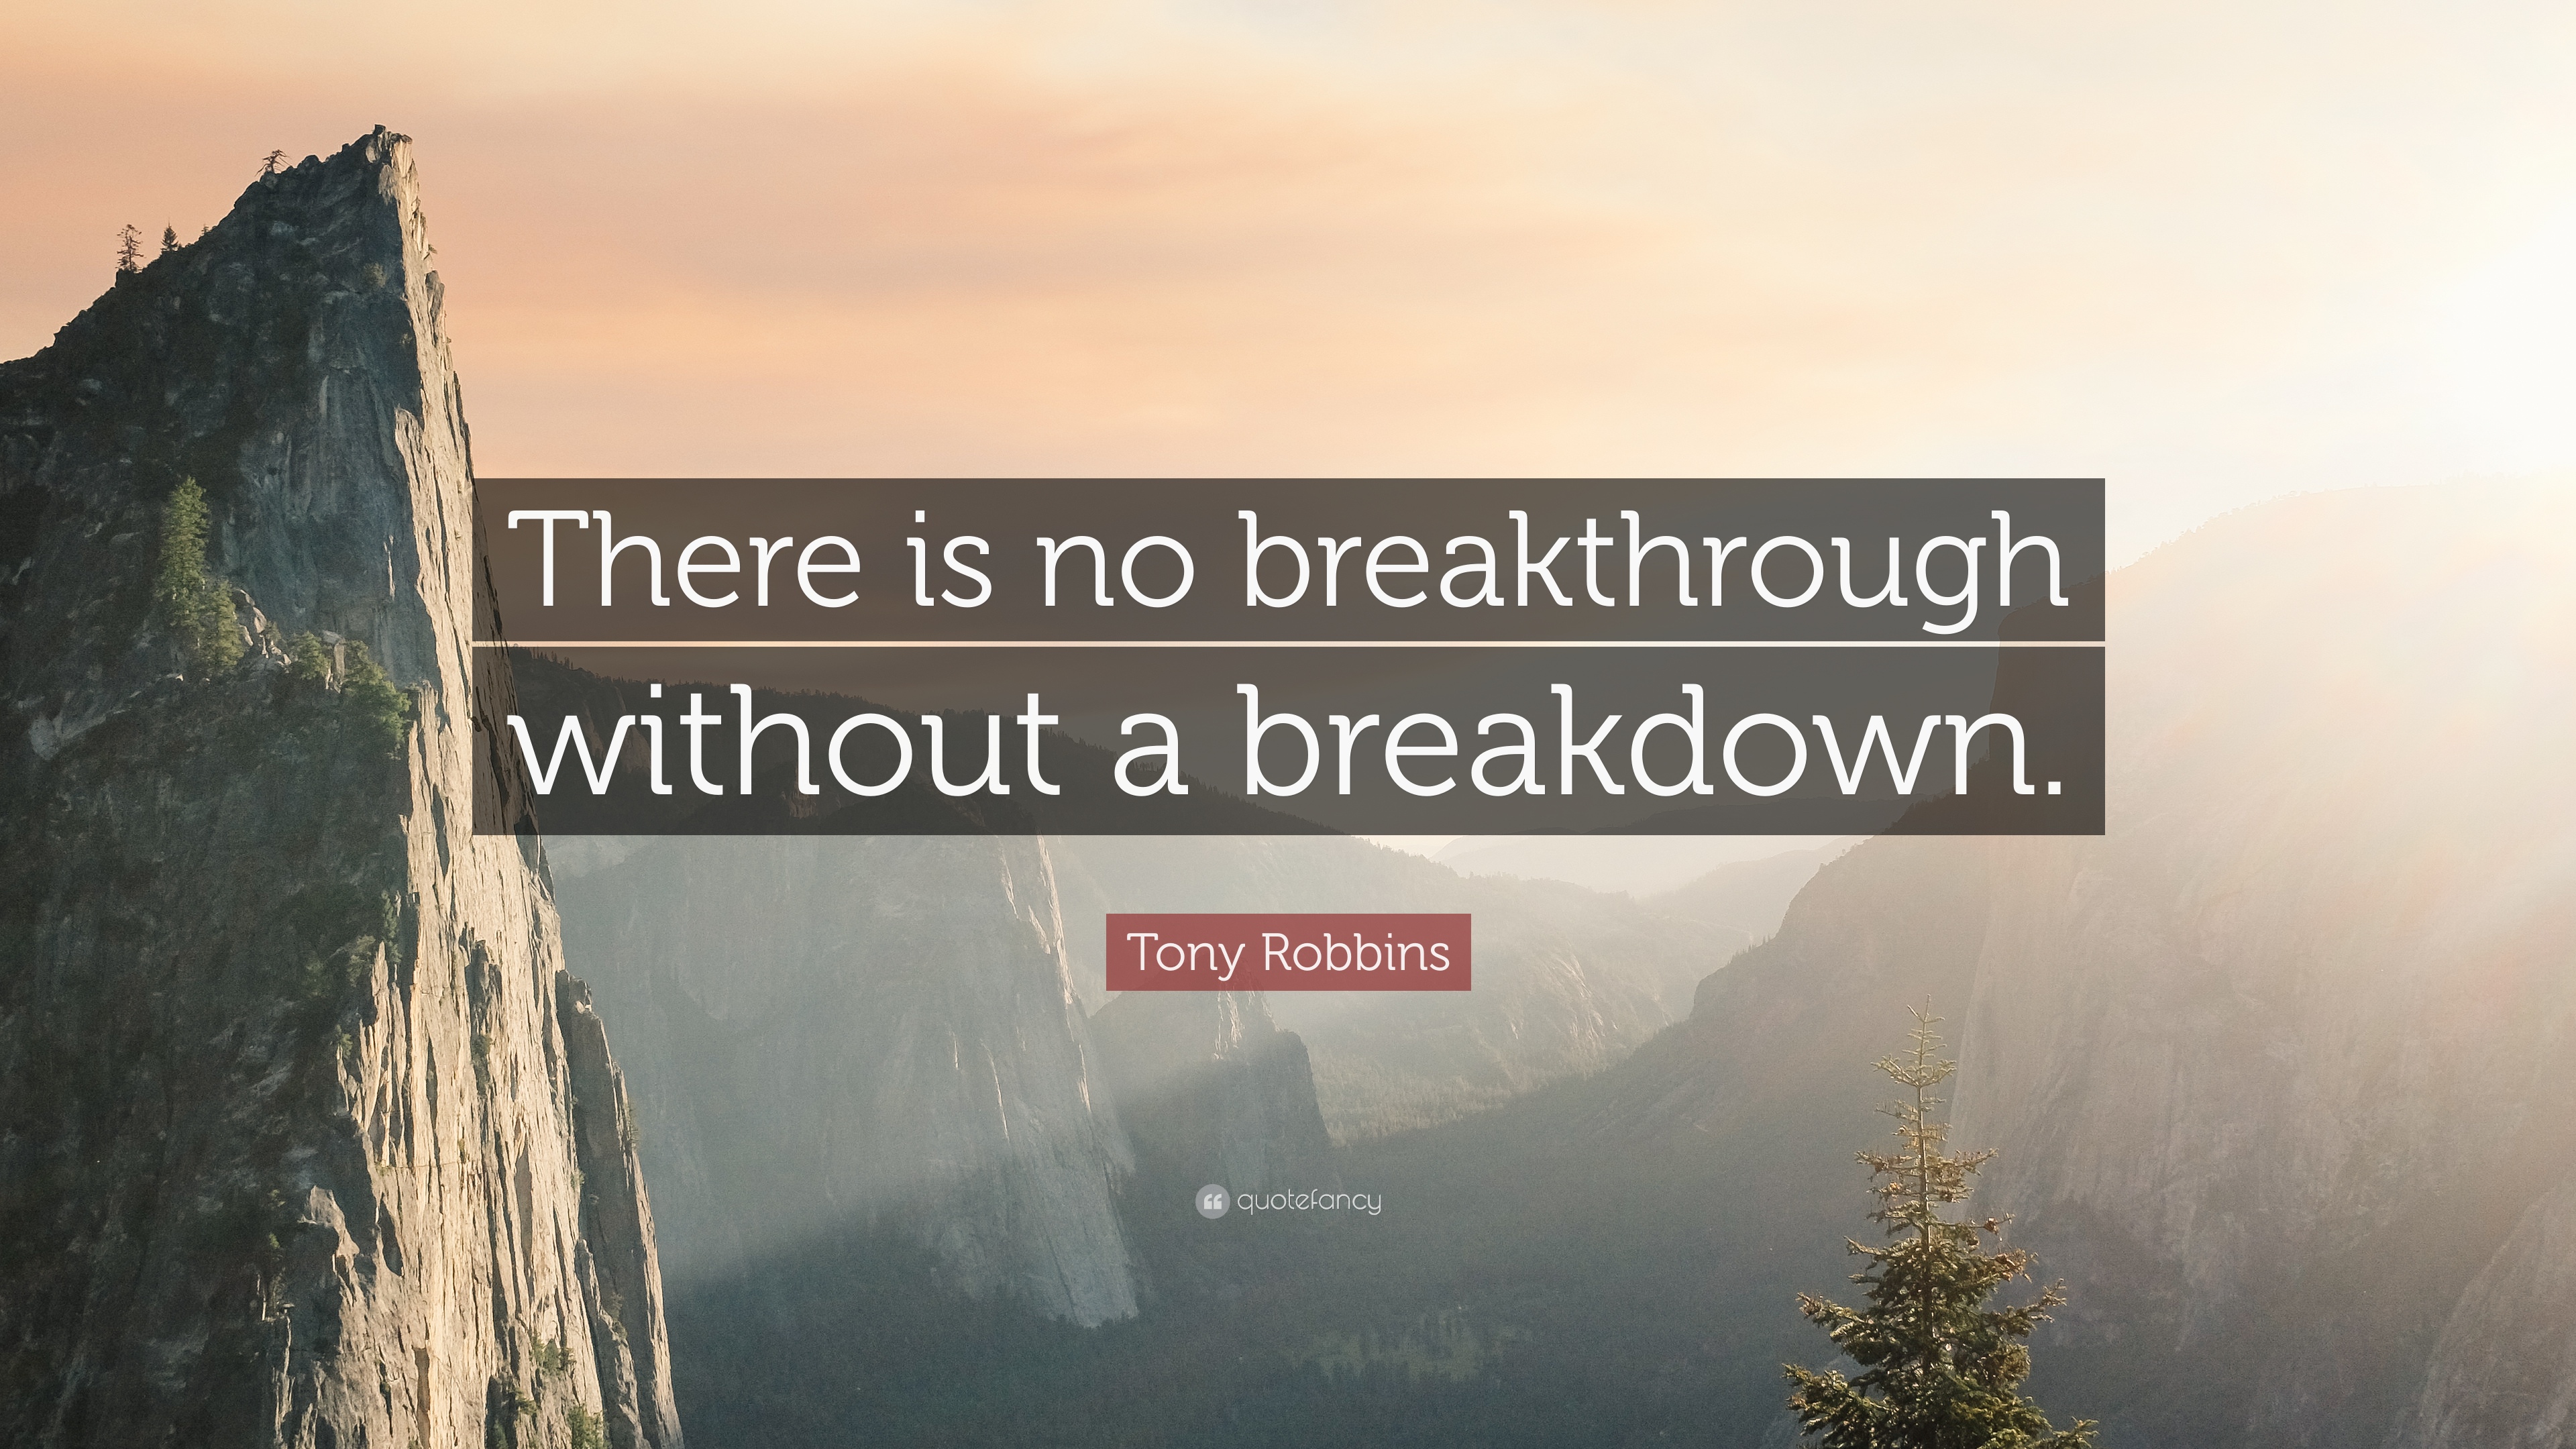 Tony Robbins Quote: “There is no breakthrough without a breakdown